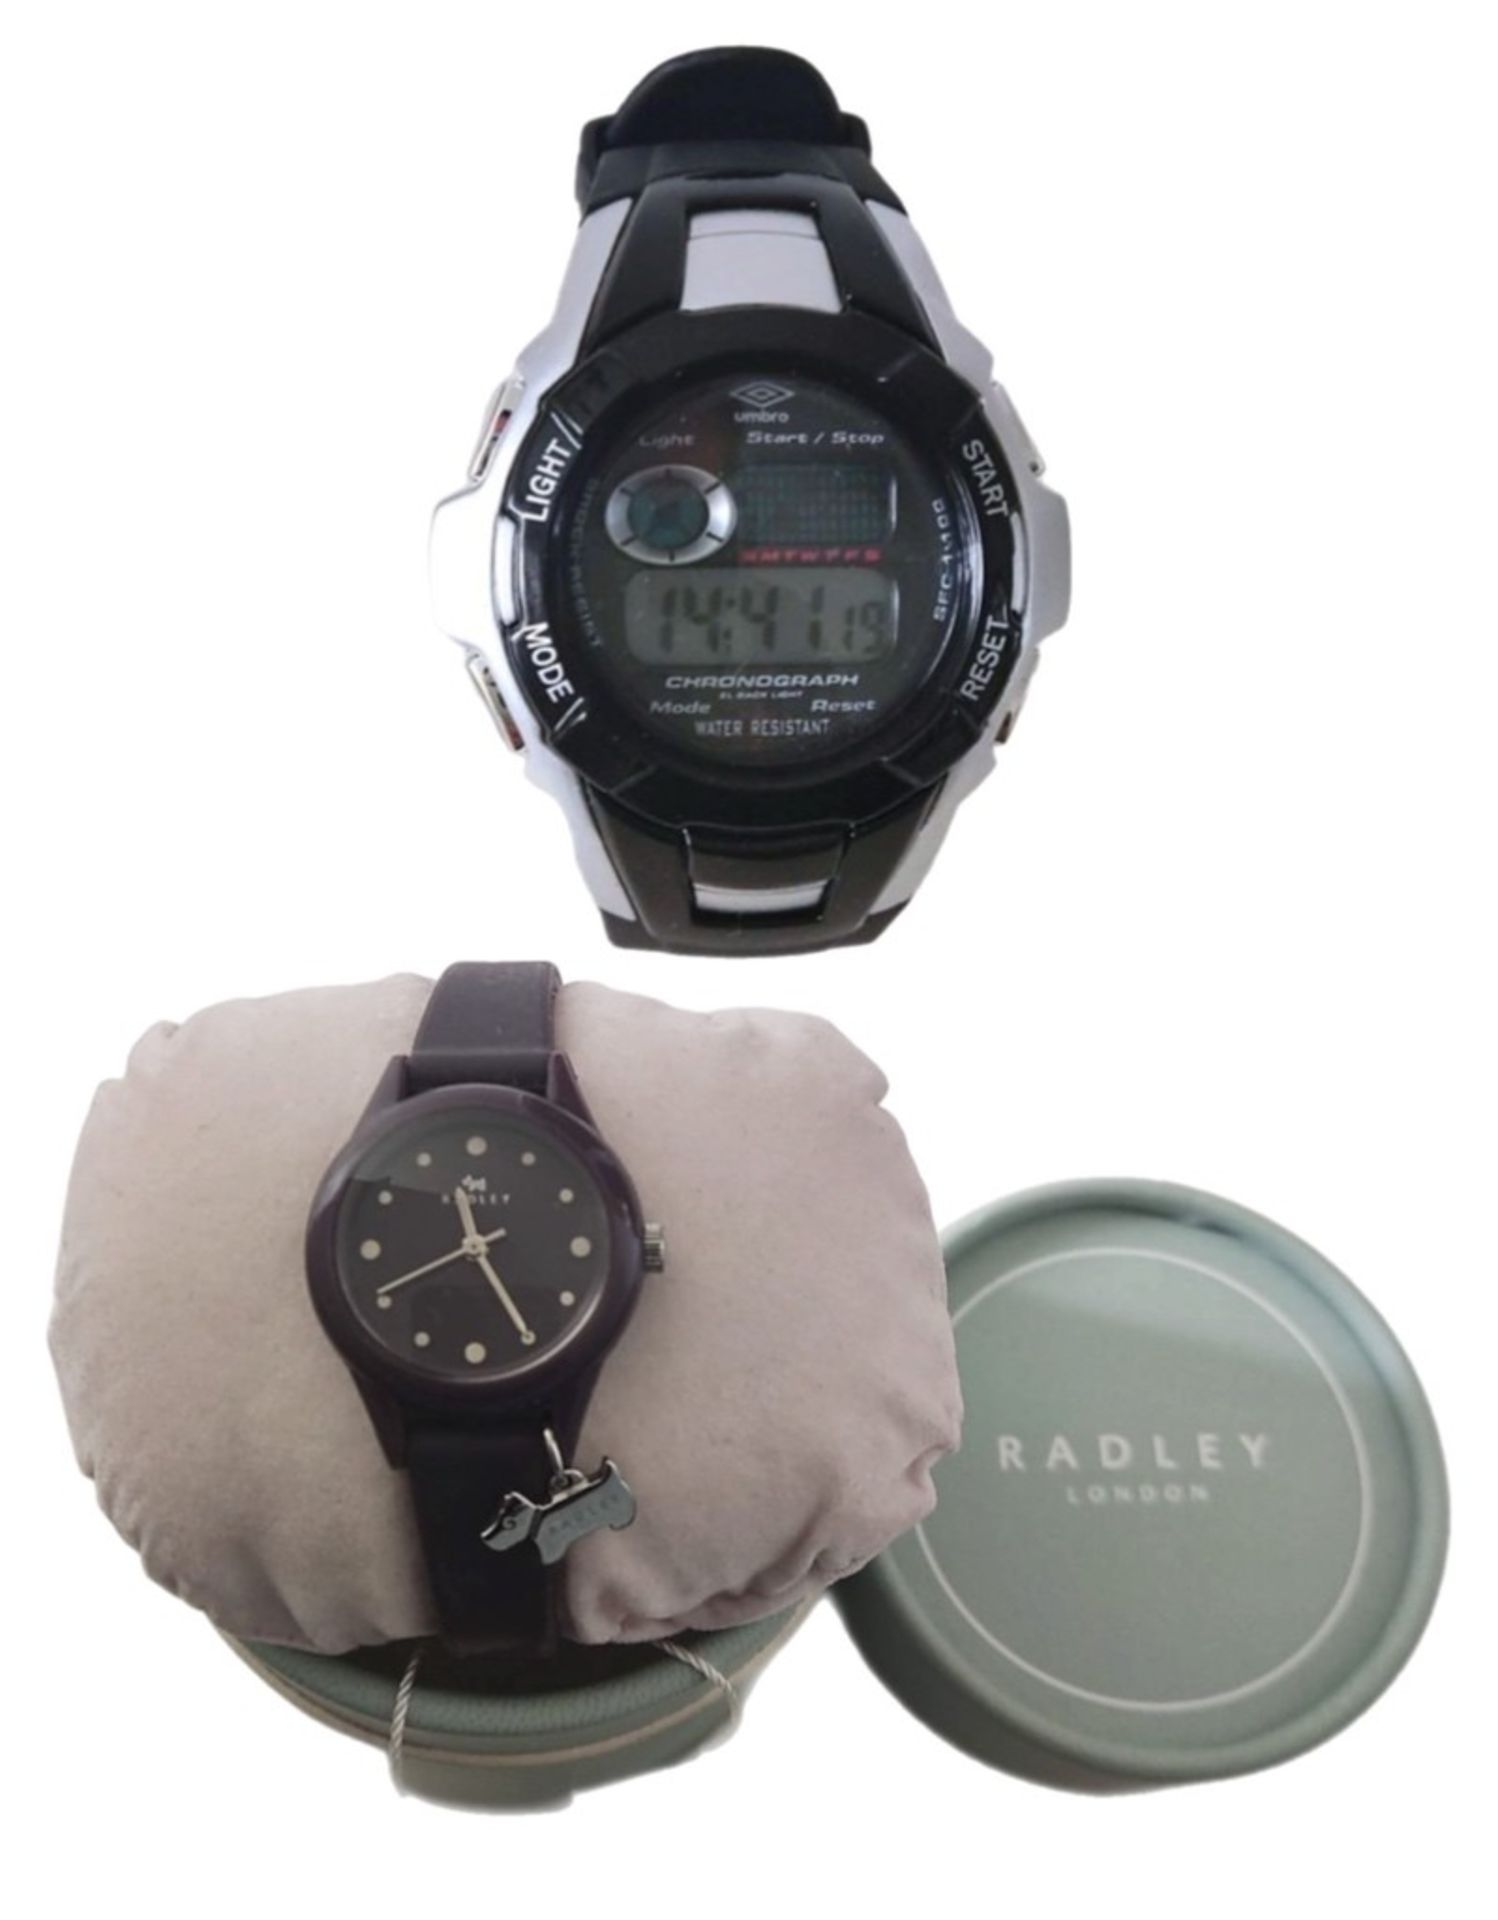 A Radley lady's boxed watch with battery, and an Umbro Mens sports watch with battery.